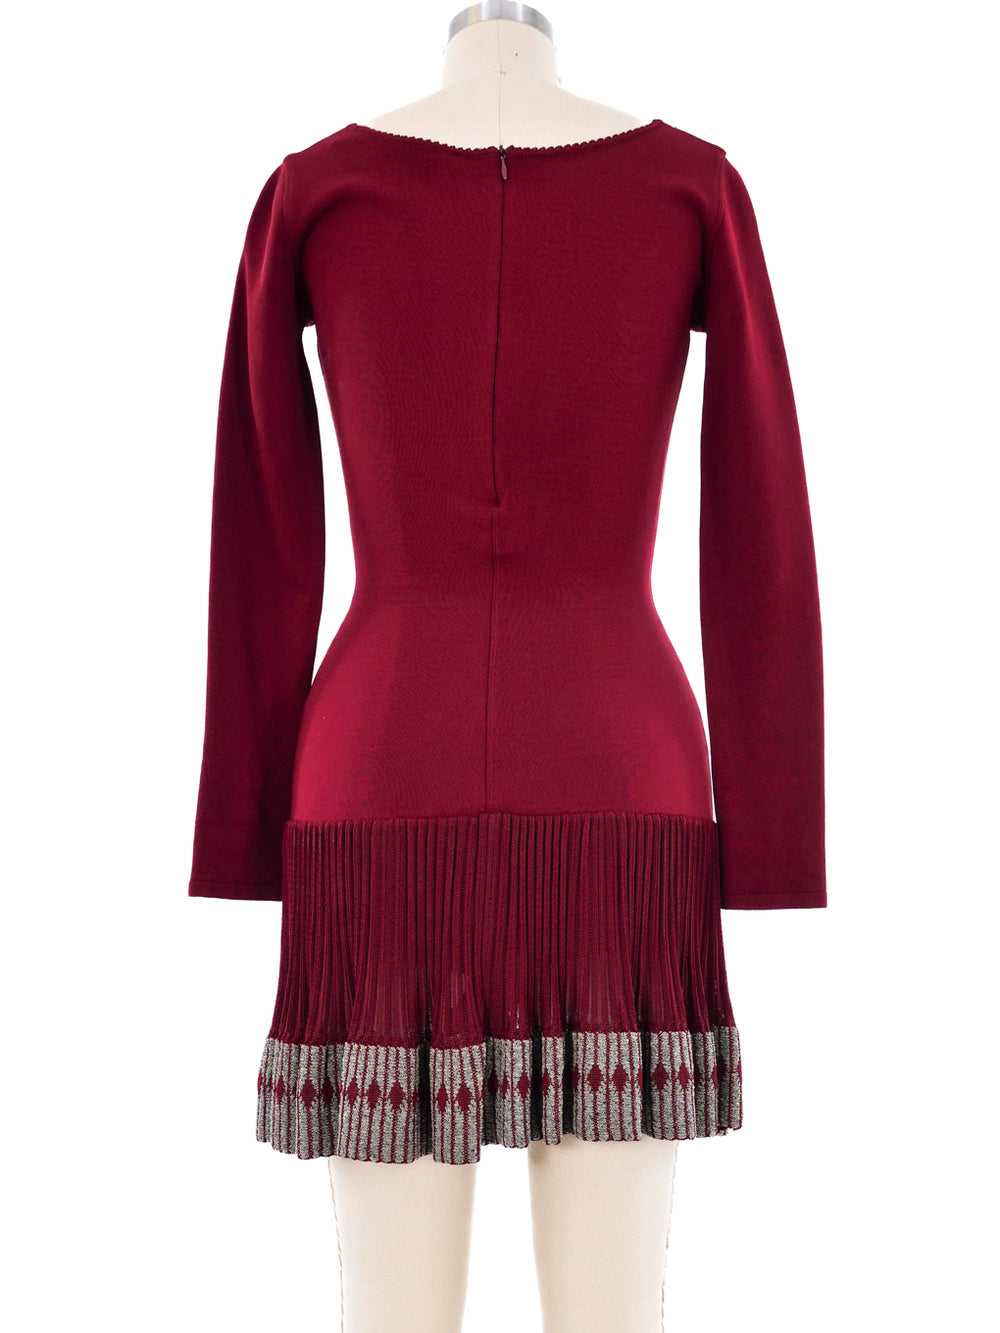 Alaia Cranberry Fit and Flare Ruffle Dress - image 3